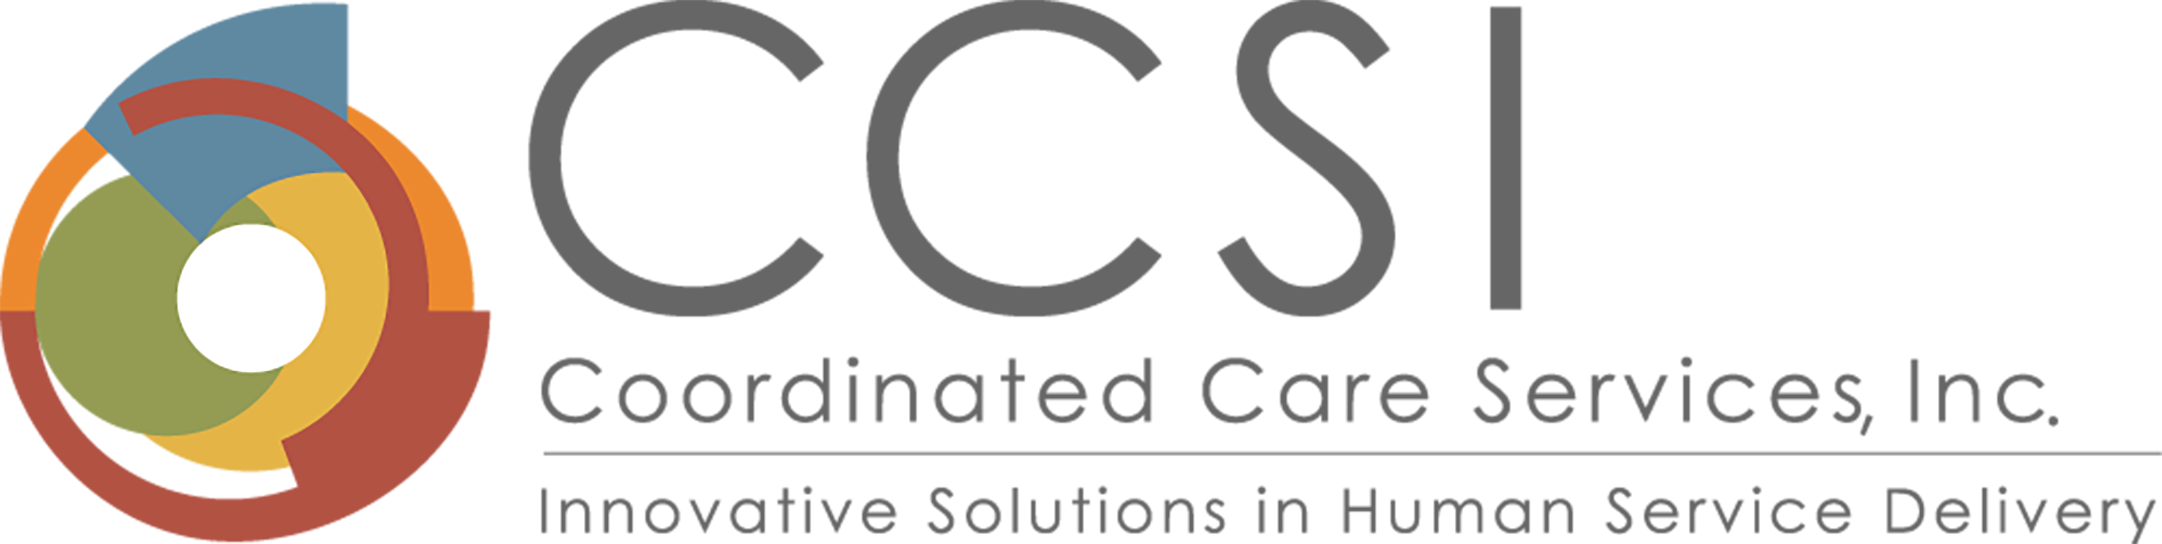 Coordinated Care Services logo